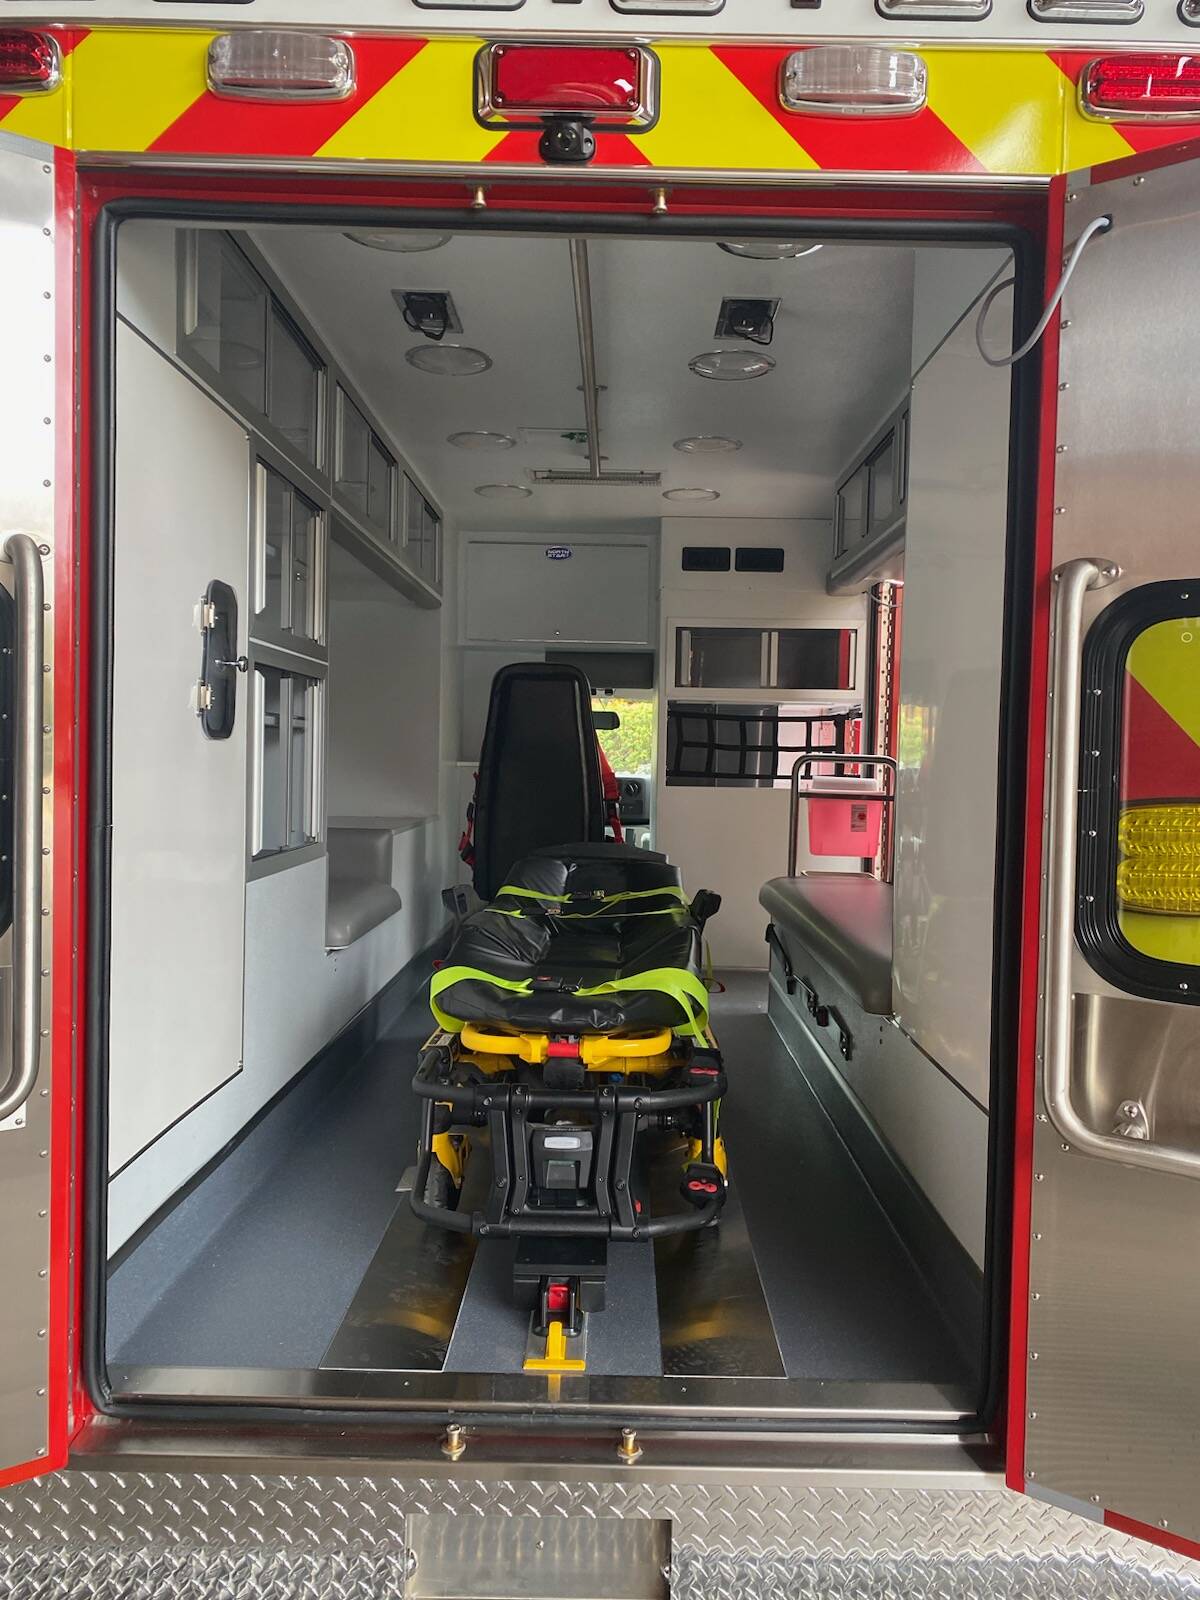 The interior of the Snoqualmie Tribe’s new ambulance.